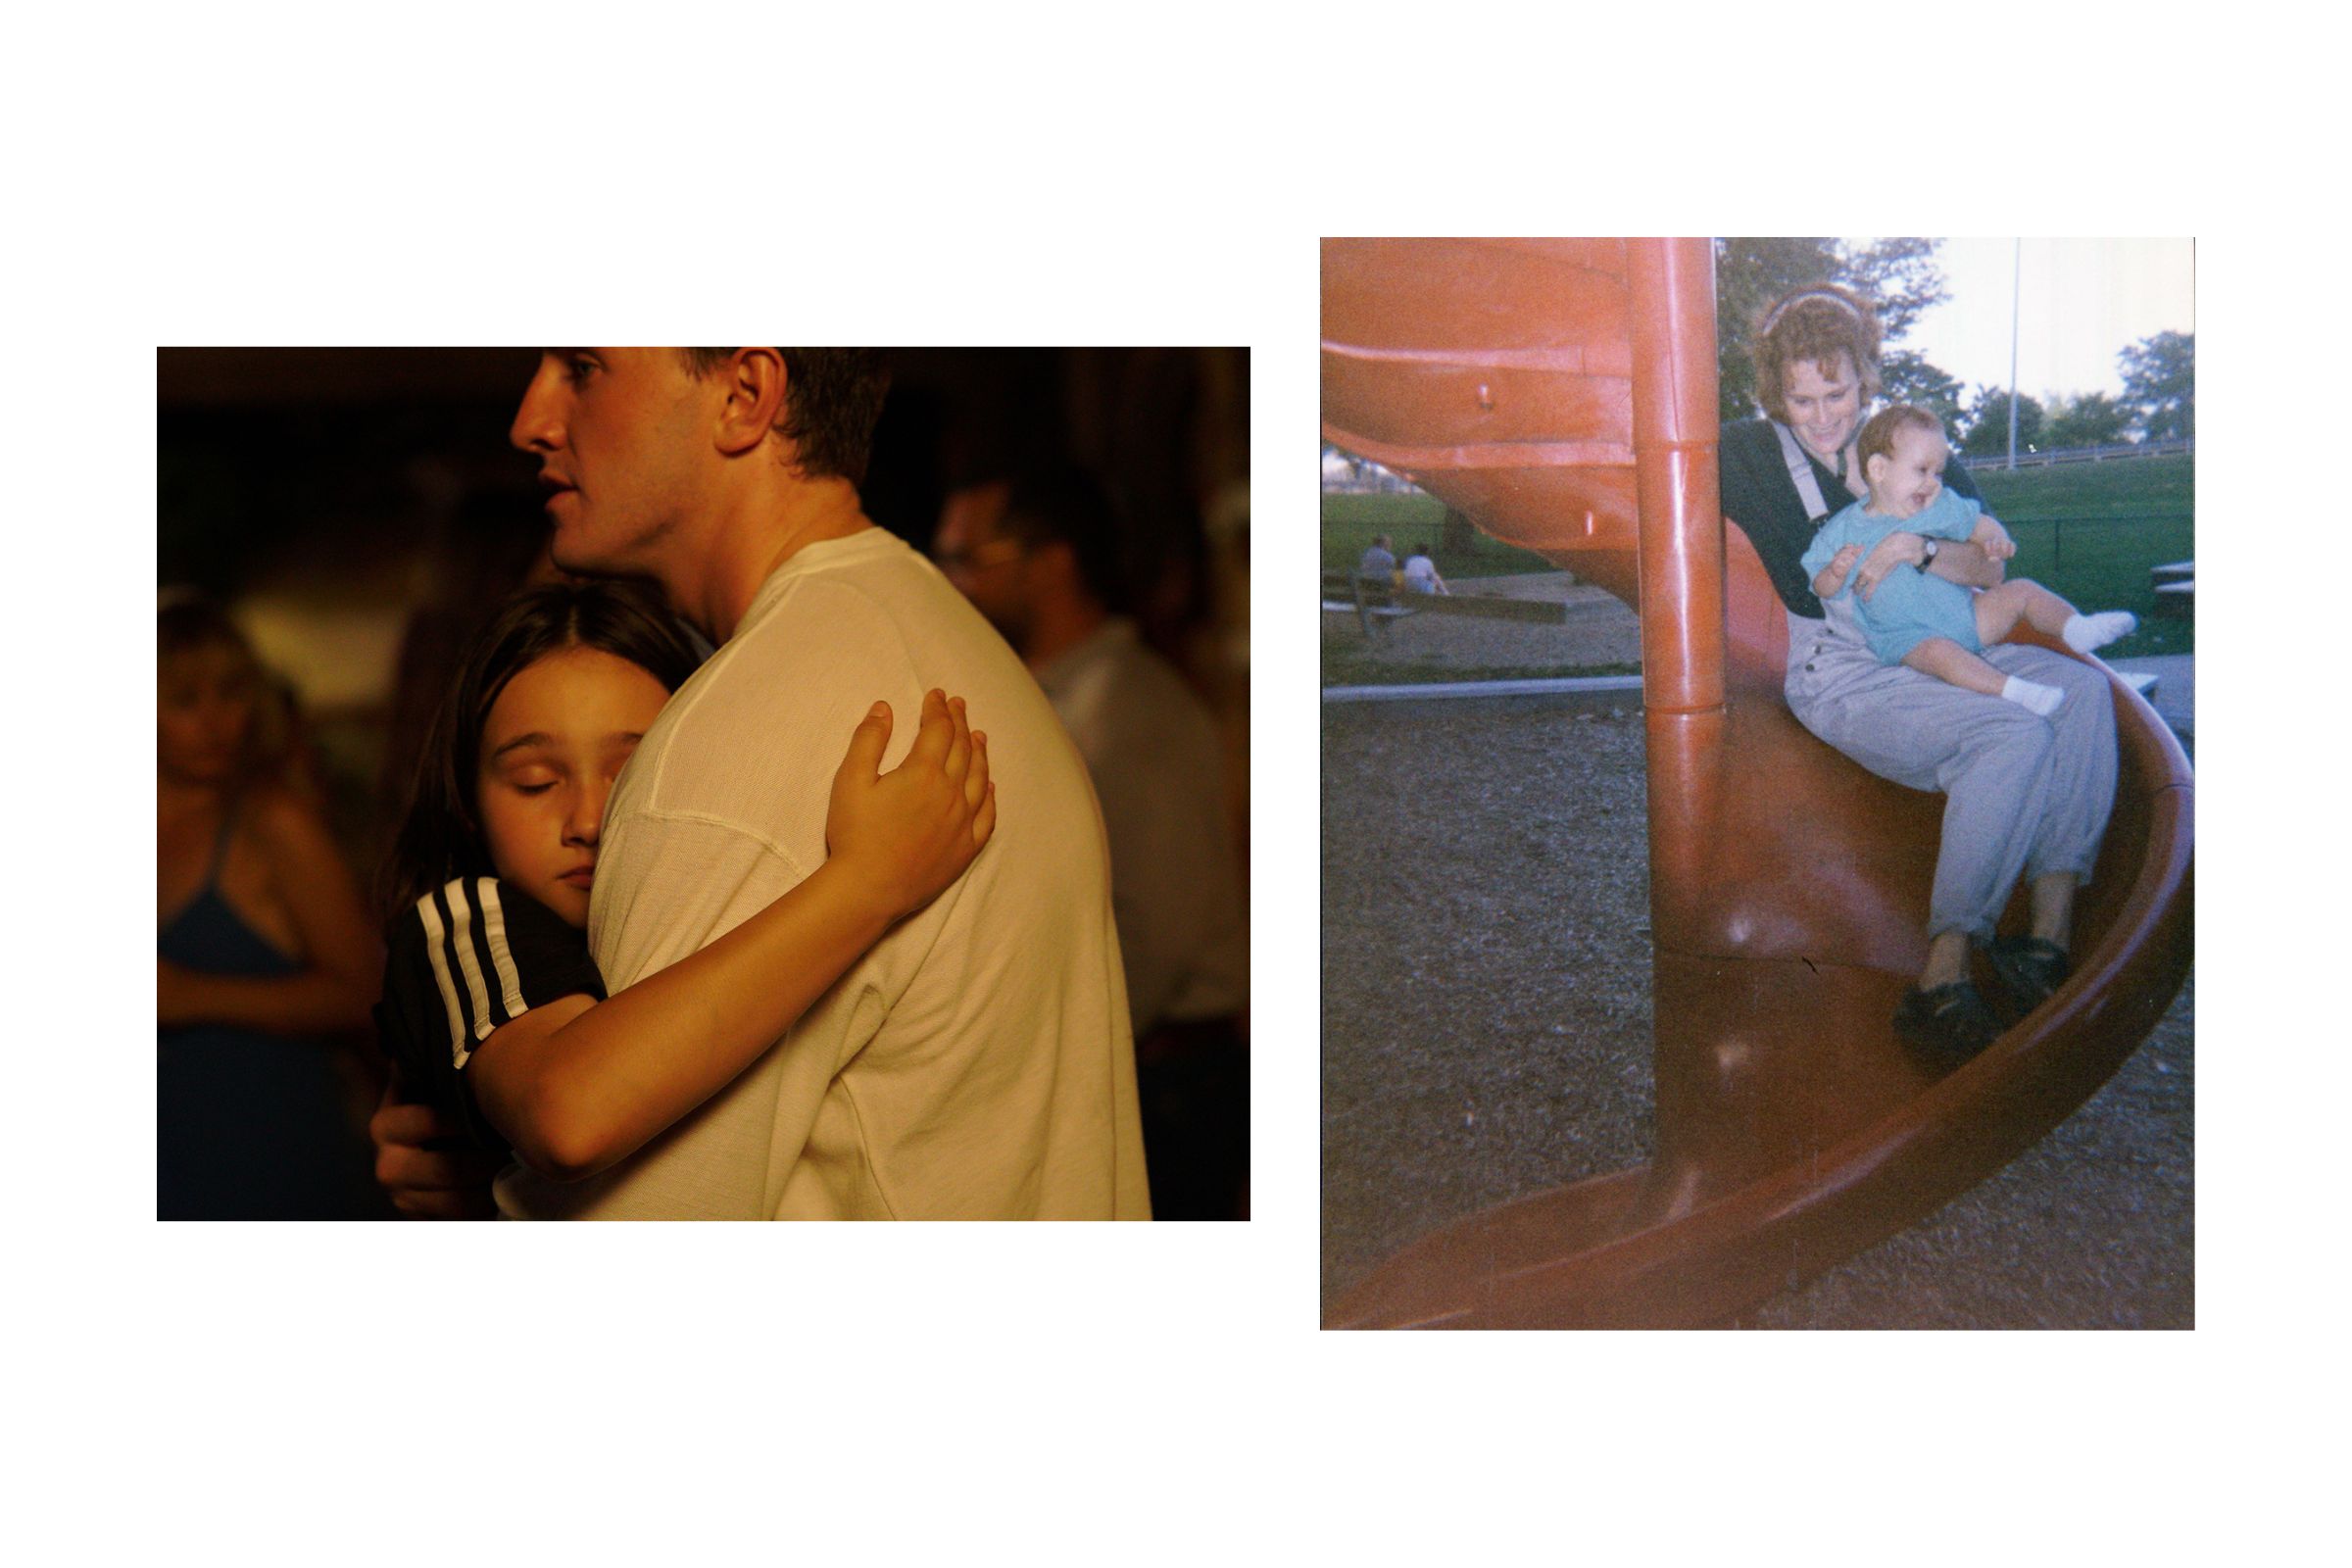 On the left, a young father hugs his young daughter, swaying to music. On the right, a mother in overalls clutches her baby, sliding down a red slide